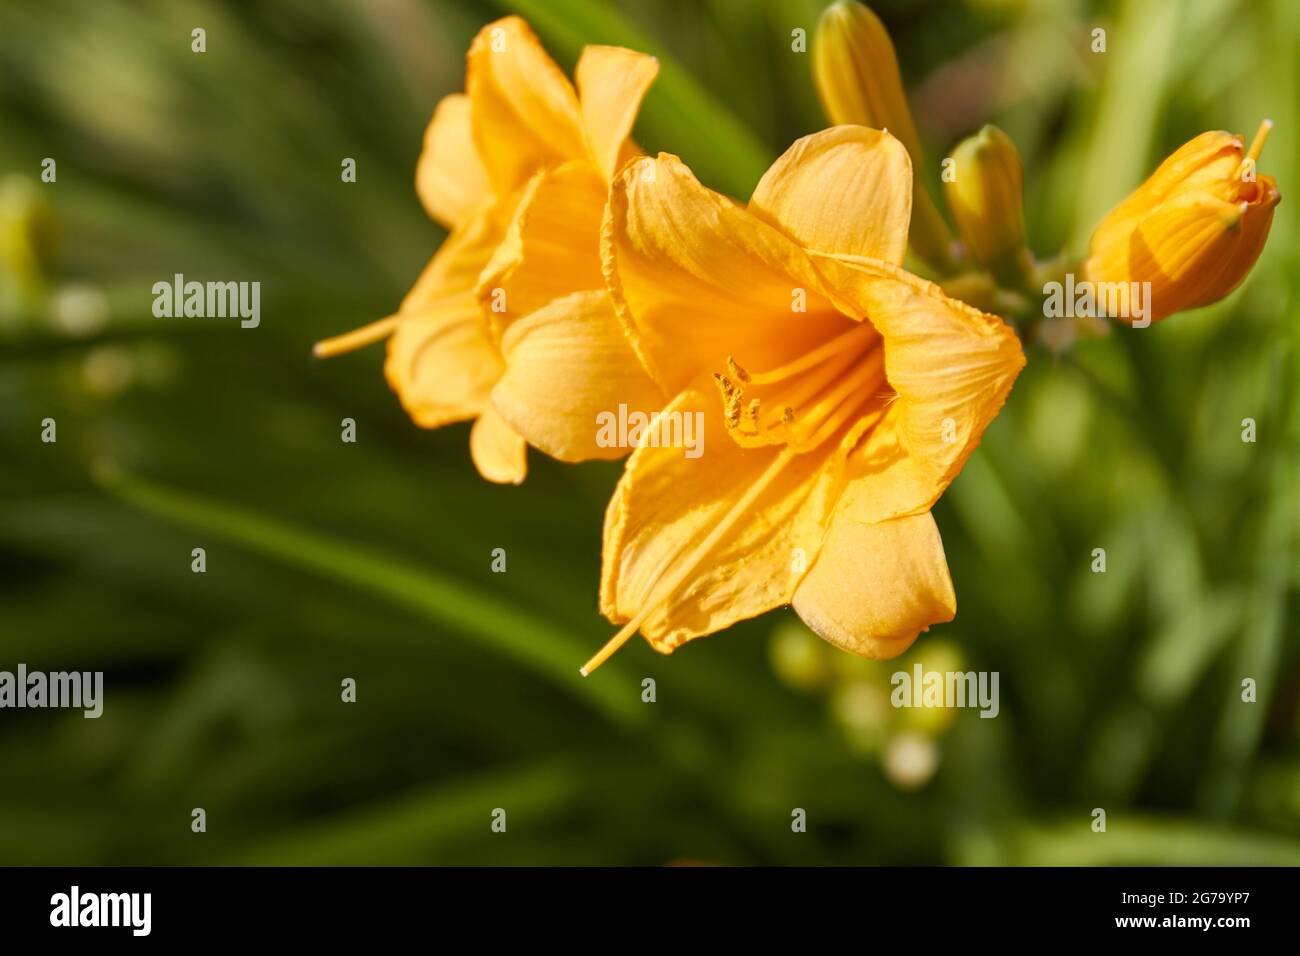 Two yellow amaryllis flowers on green blurred background. Stock Photo